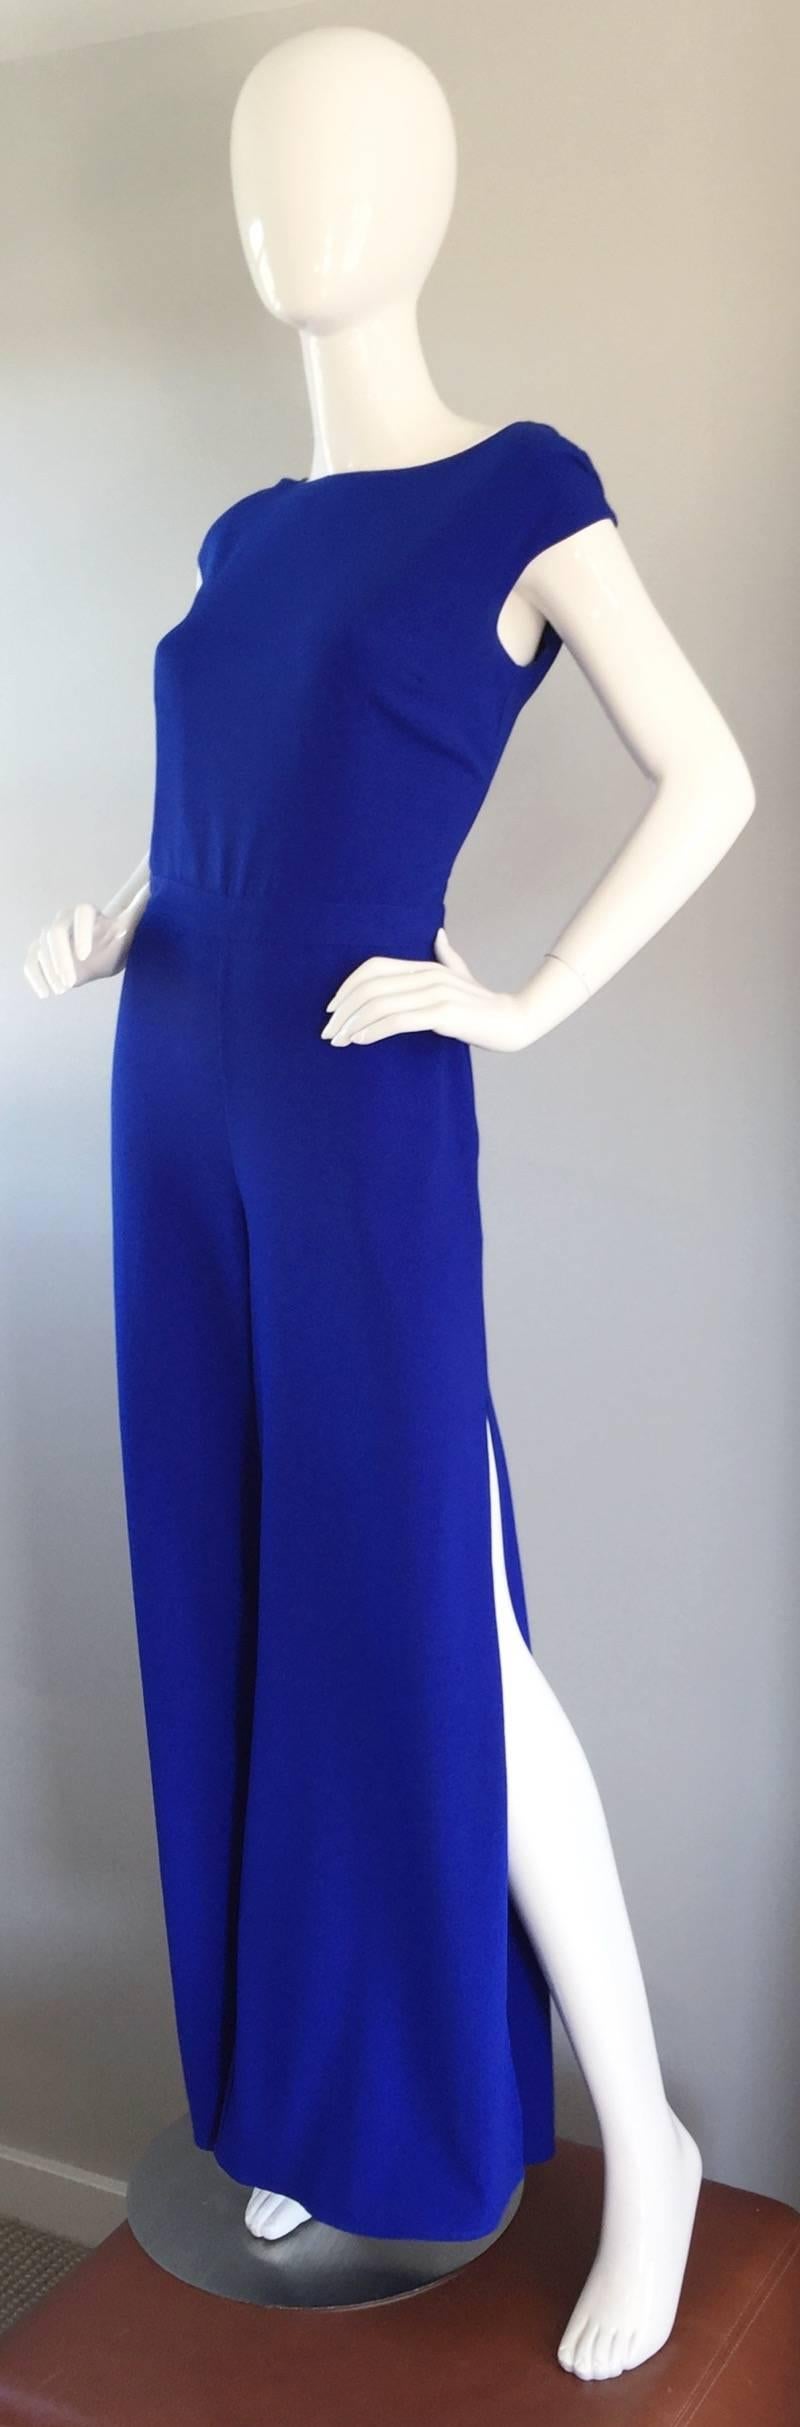 So Chic!!! MAX MARA silk jumpsuit, in a beautiful cobalt blue color! Stylish wide legs, with slits up the outside seam on each leg. Sleek and sophisticated fit, with just the right amount of sexiness and femininity. Peek-a-boo back, with clear